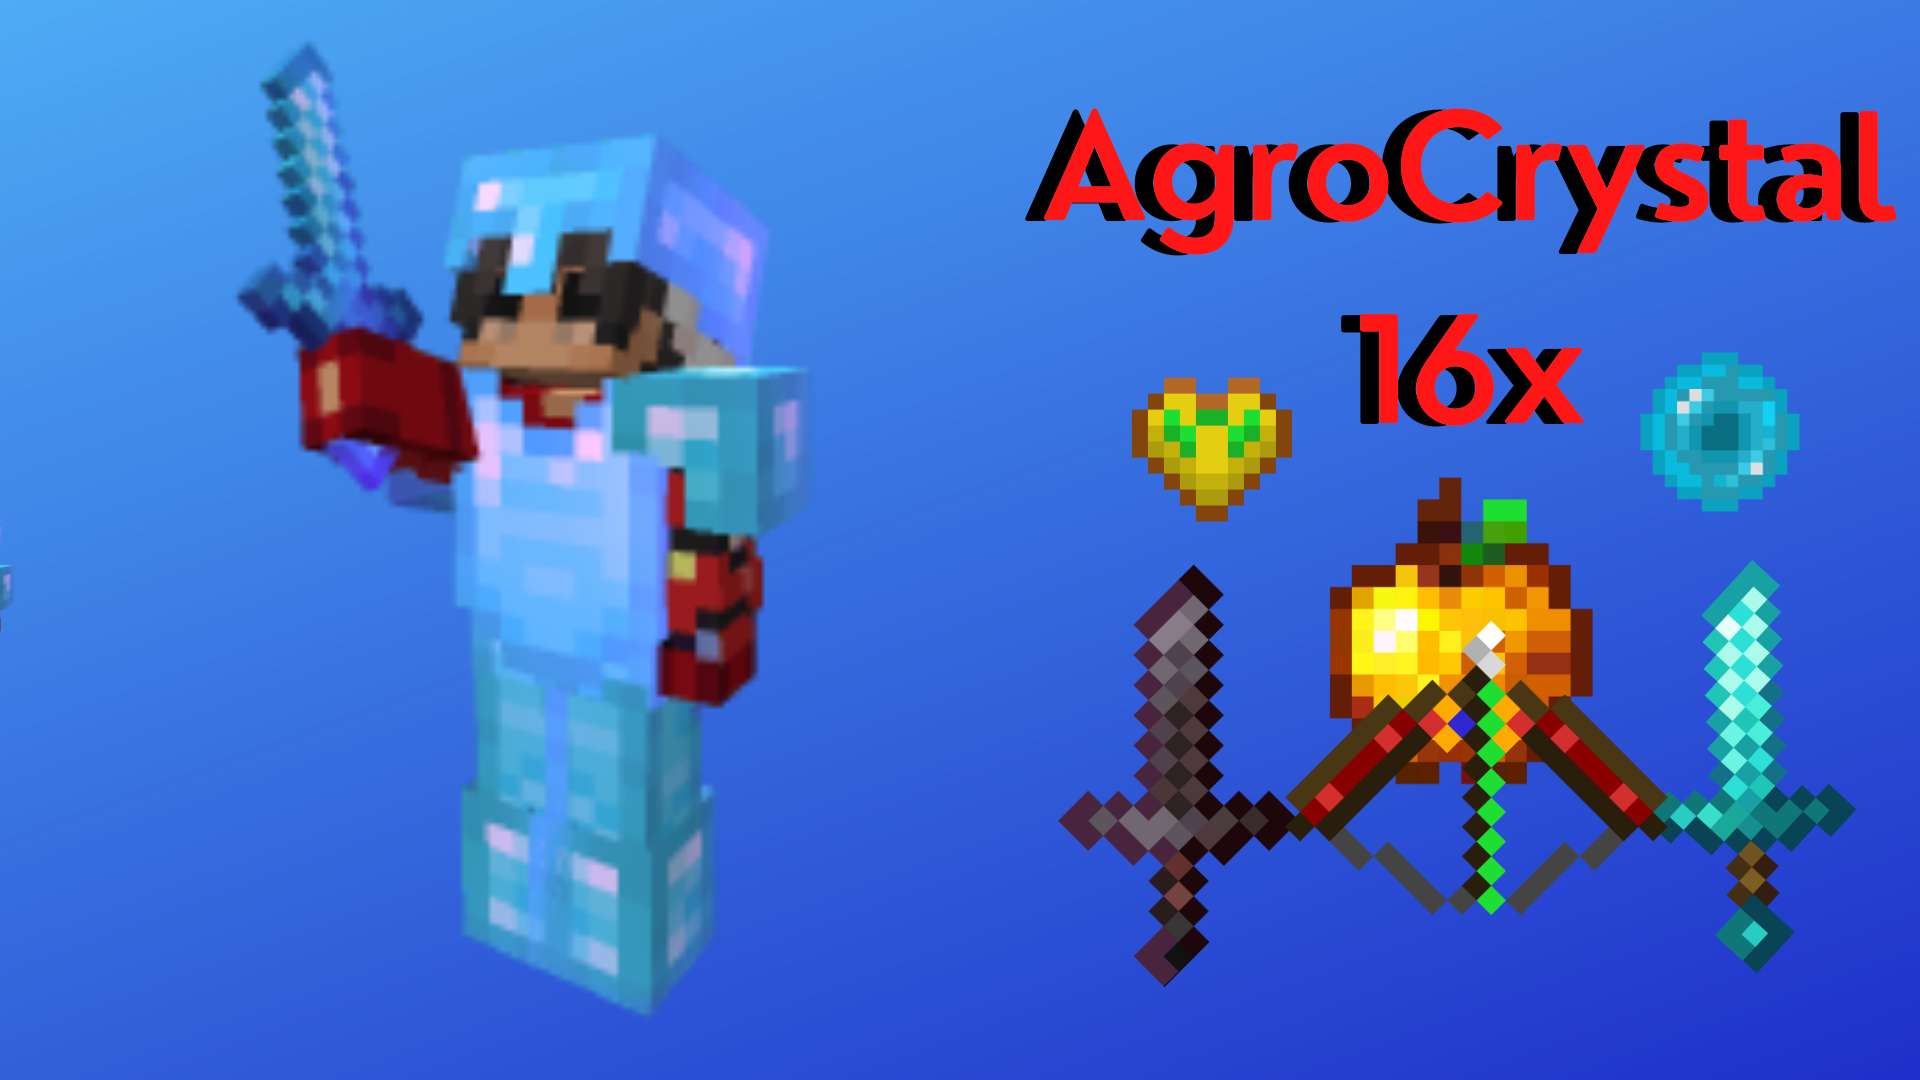 AgroCrystal - Default Edit 16x - 1.17 16x by AgronGamezYT on PvPRP